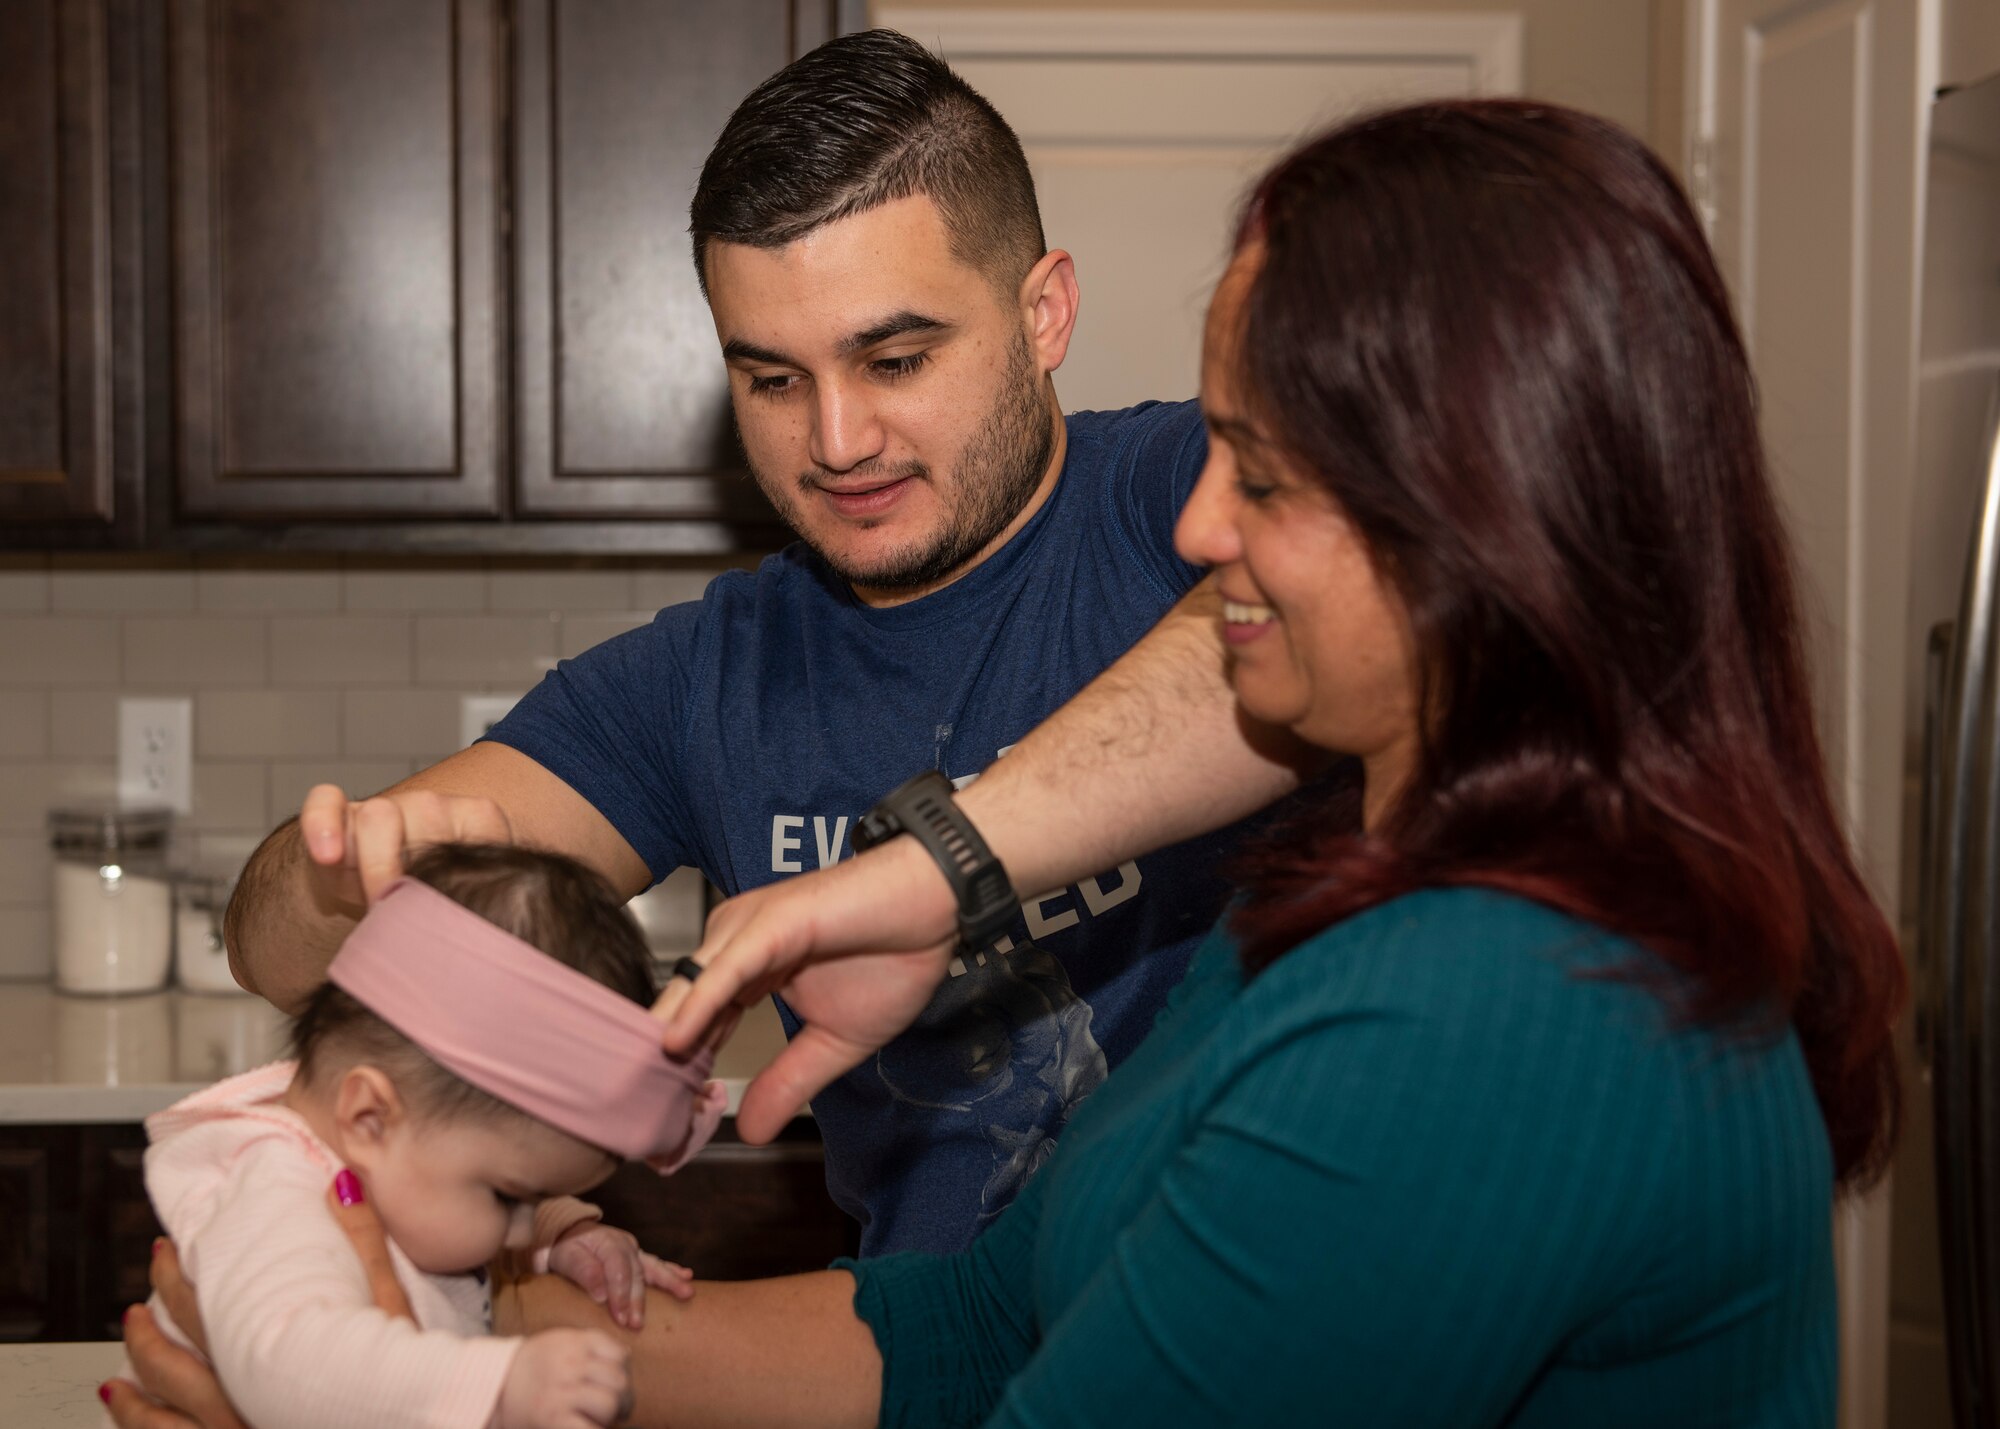 U.S. Air Force Staff Sgt. Ramses Alfonso, 673d Security Forces Squadron lead patrolman, adjusts his daughter’s headband while his mother holds his daughter in Anchorage, Alaska, Dec. 20, 2019. When Alfonso was in fifth grade, he immigrated to the United States from Cuba and learned English. Alfonso graduated from Anchorage Police Department 19-1 Academy and earned the Distinguished Honor Graduate Award, Class Valedictorian, Top Shooter, and Top Defensive Driver in the Emergency Vehicle Operations Course.